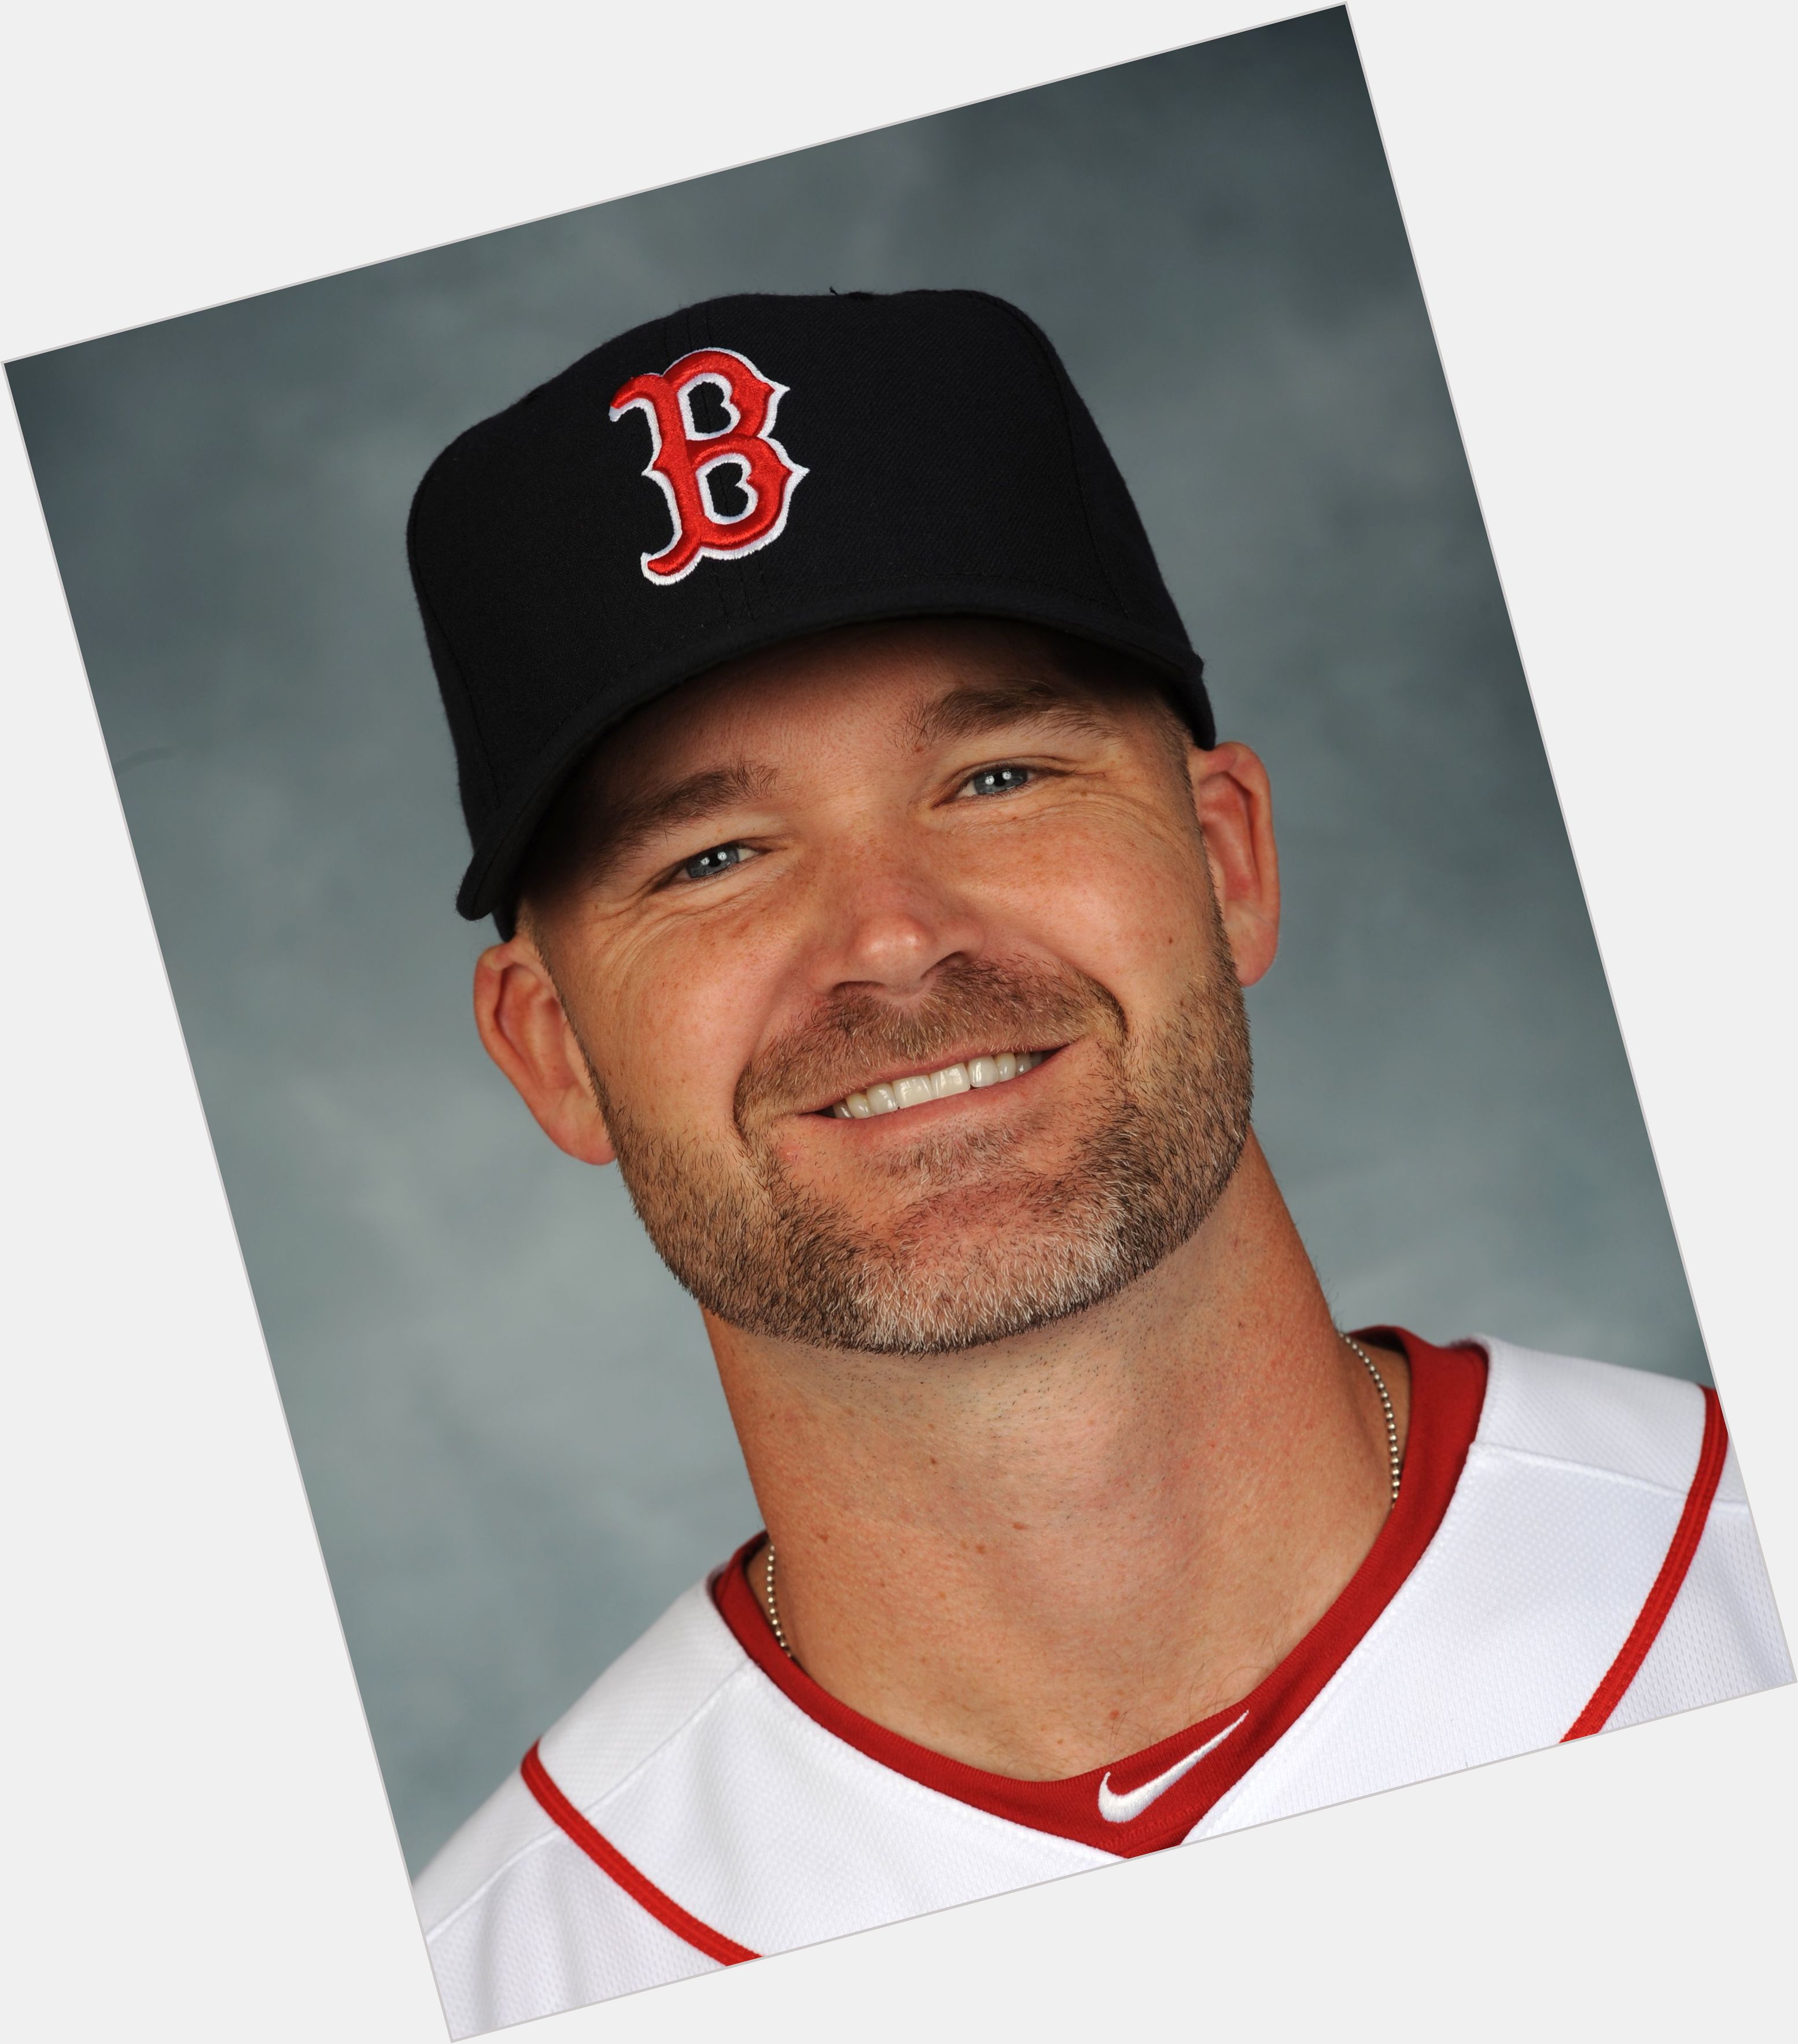 <a href="/hot-men/david-ross/is-he-married-related-cody-red-sox-christian">David Ross</a> Large body,  salt and pepper hair & hairstyles